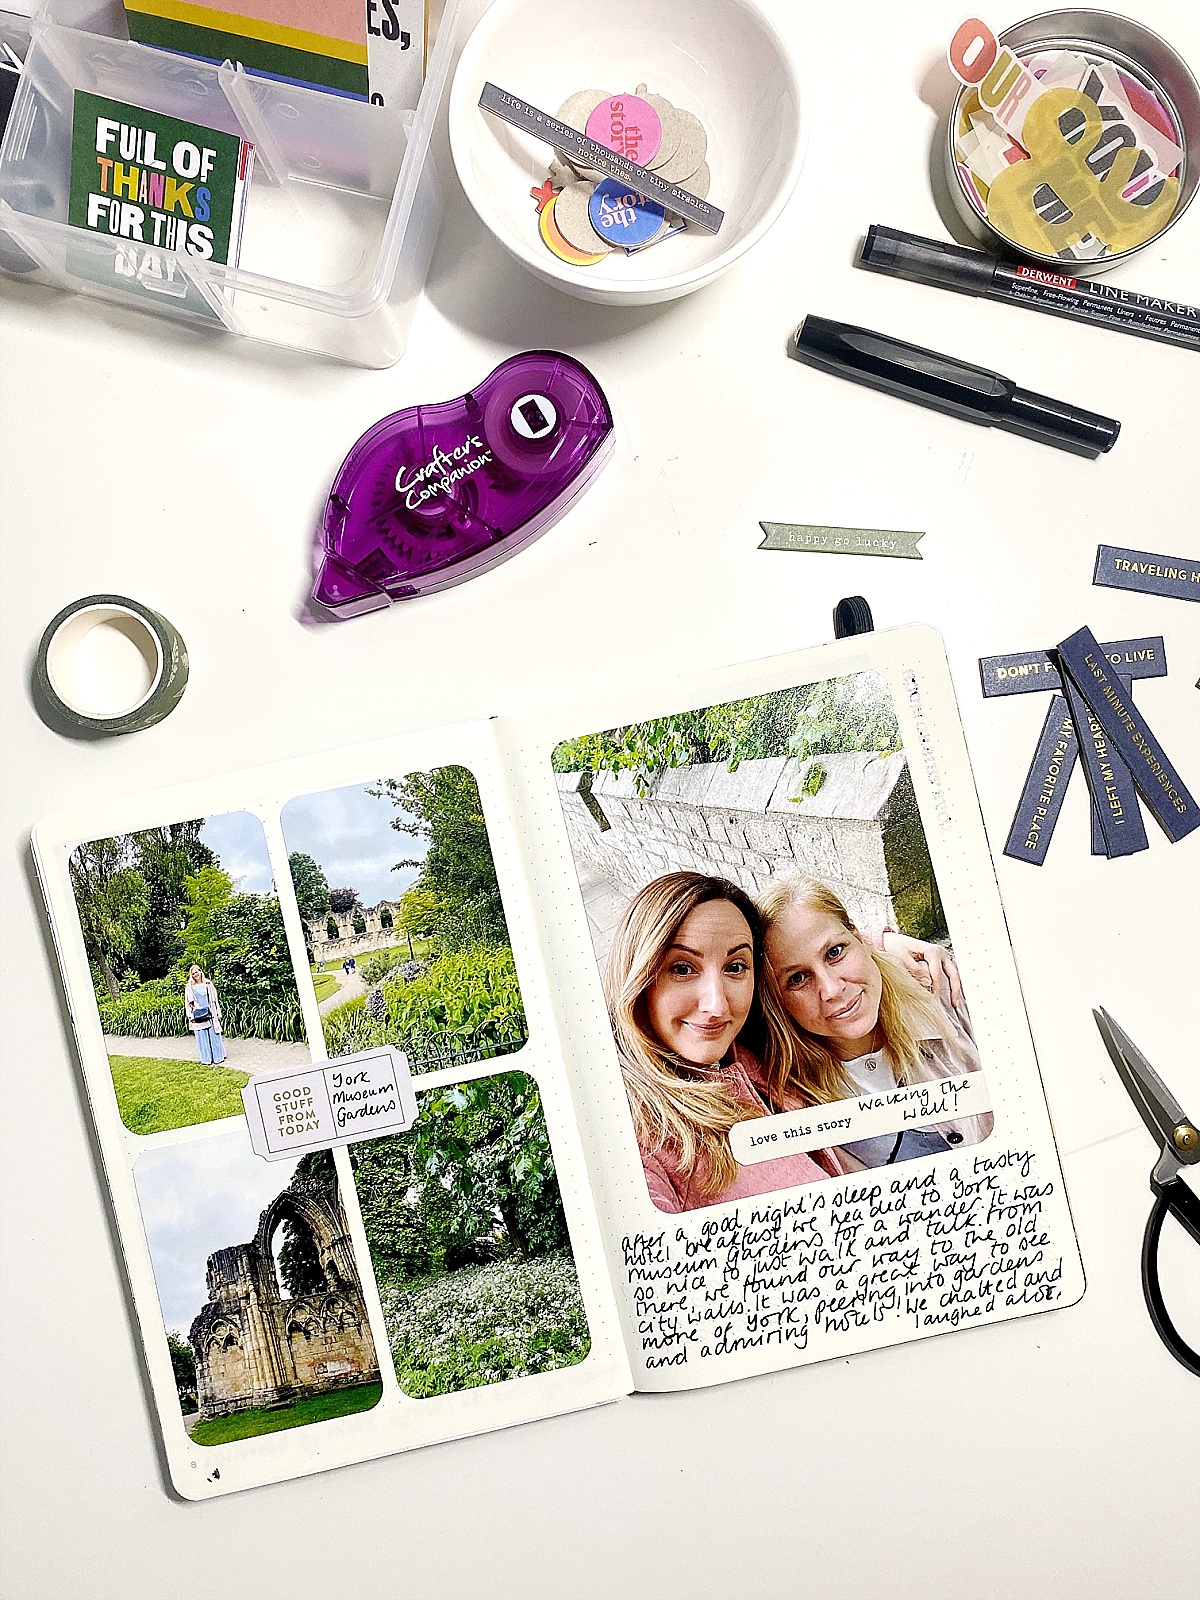 How to Make a Travel Scrapbook